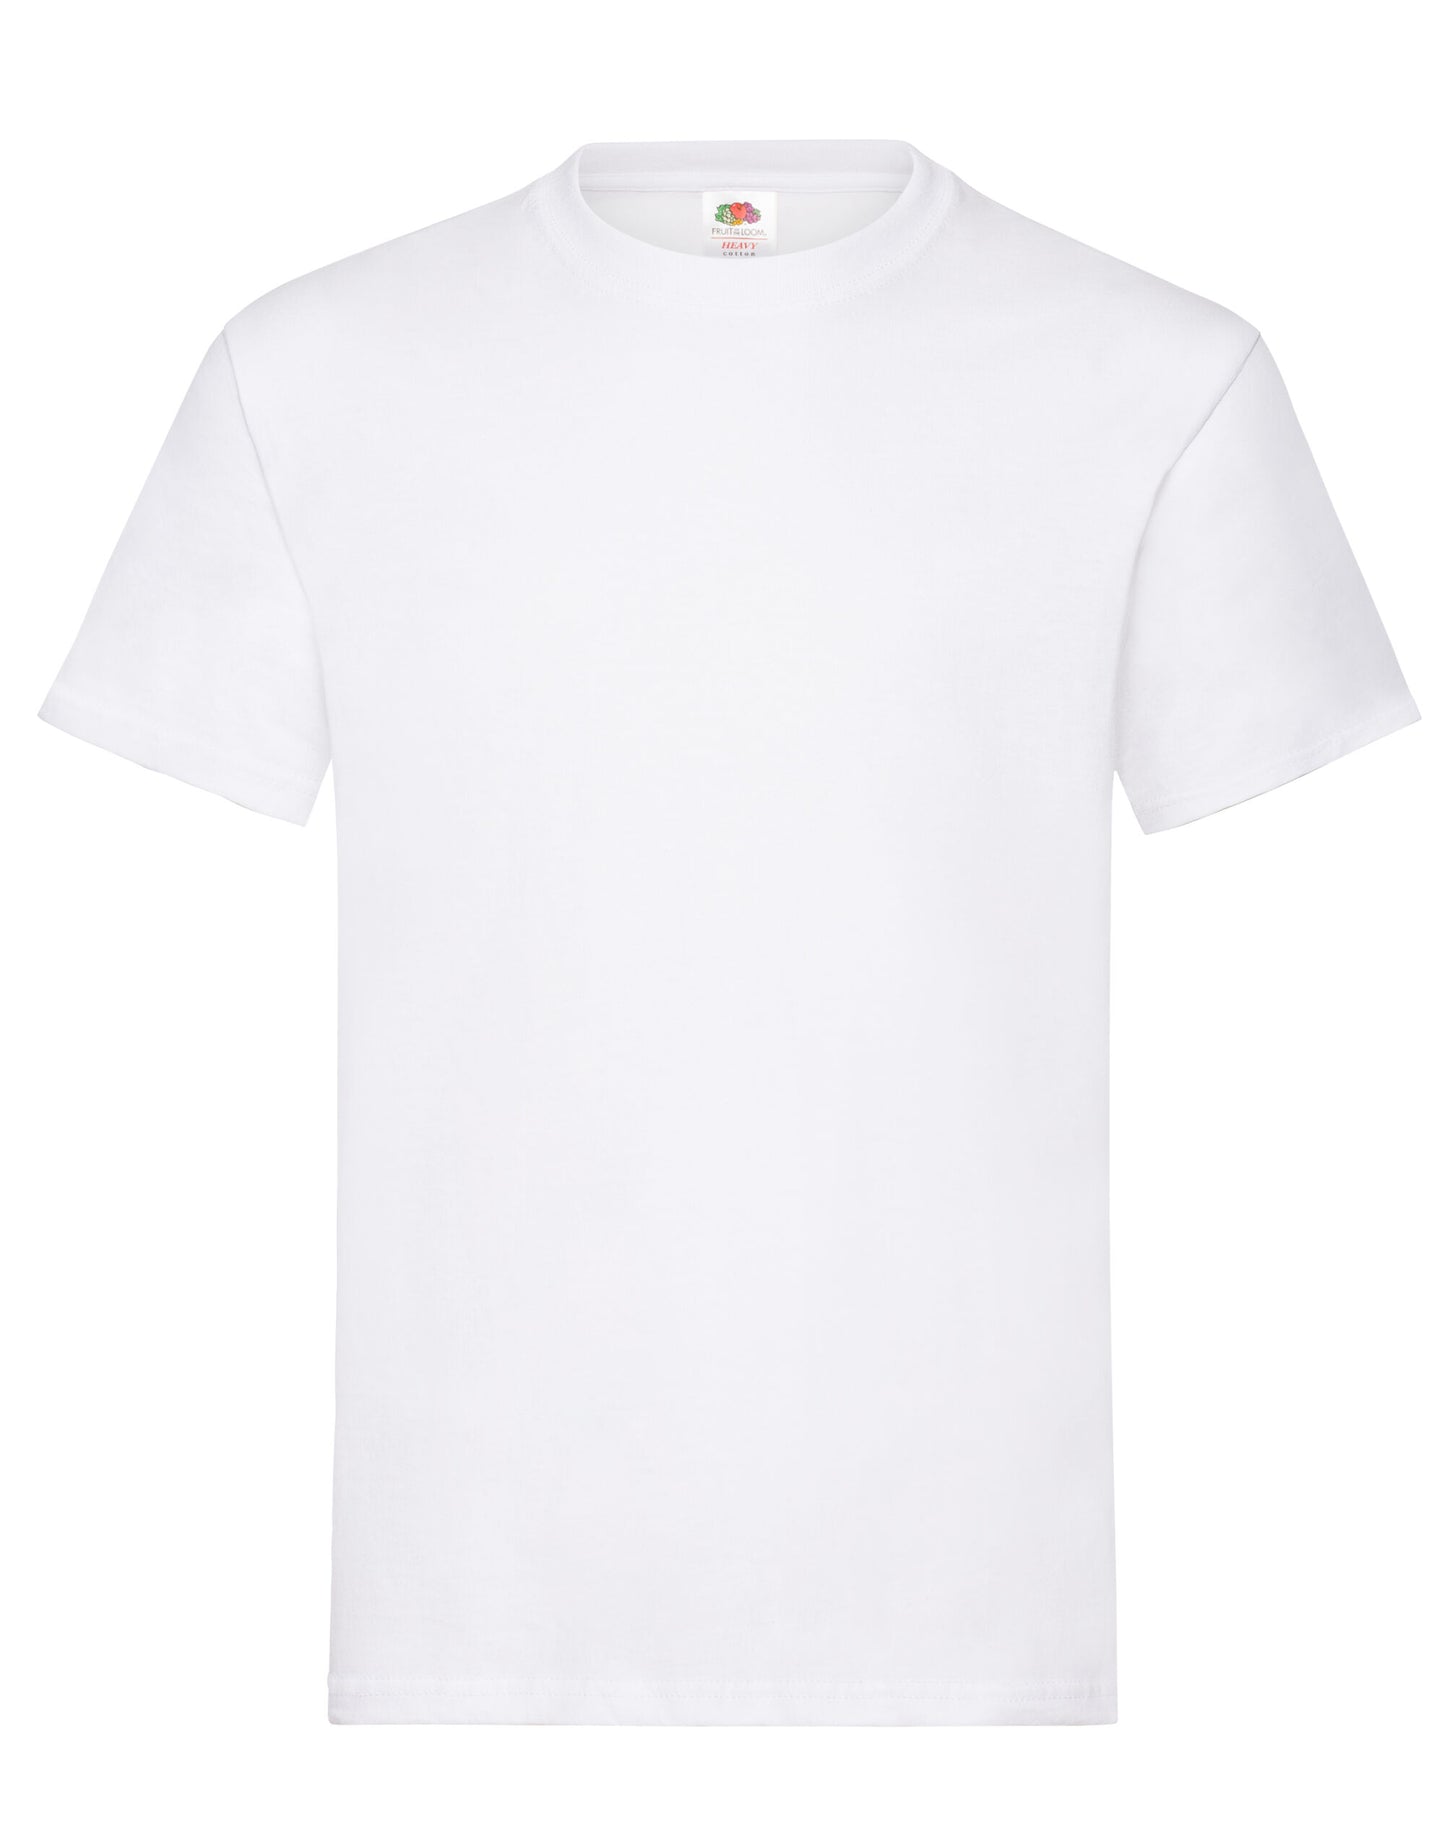 Fruit of the Loom Heavy Cotton T